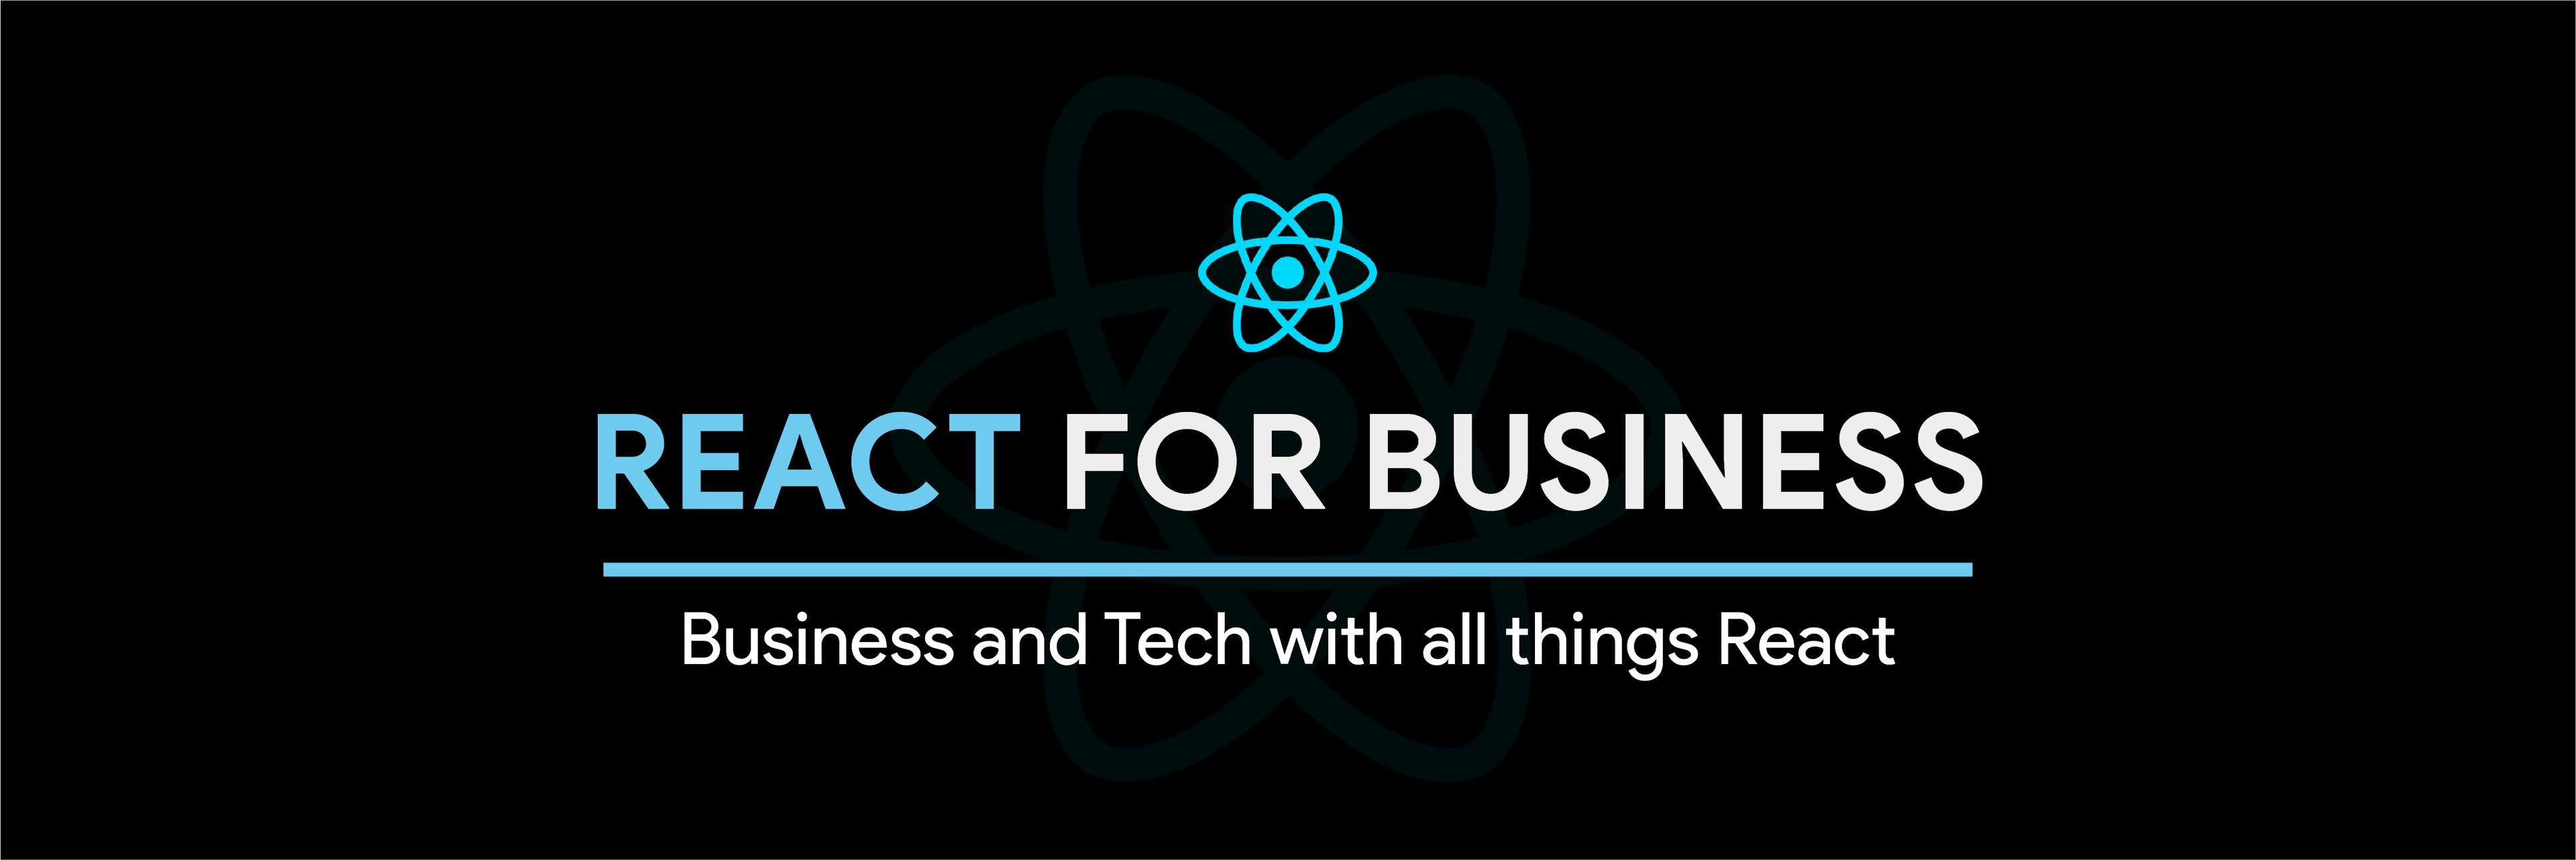 React For Business 2019